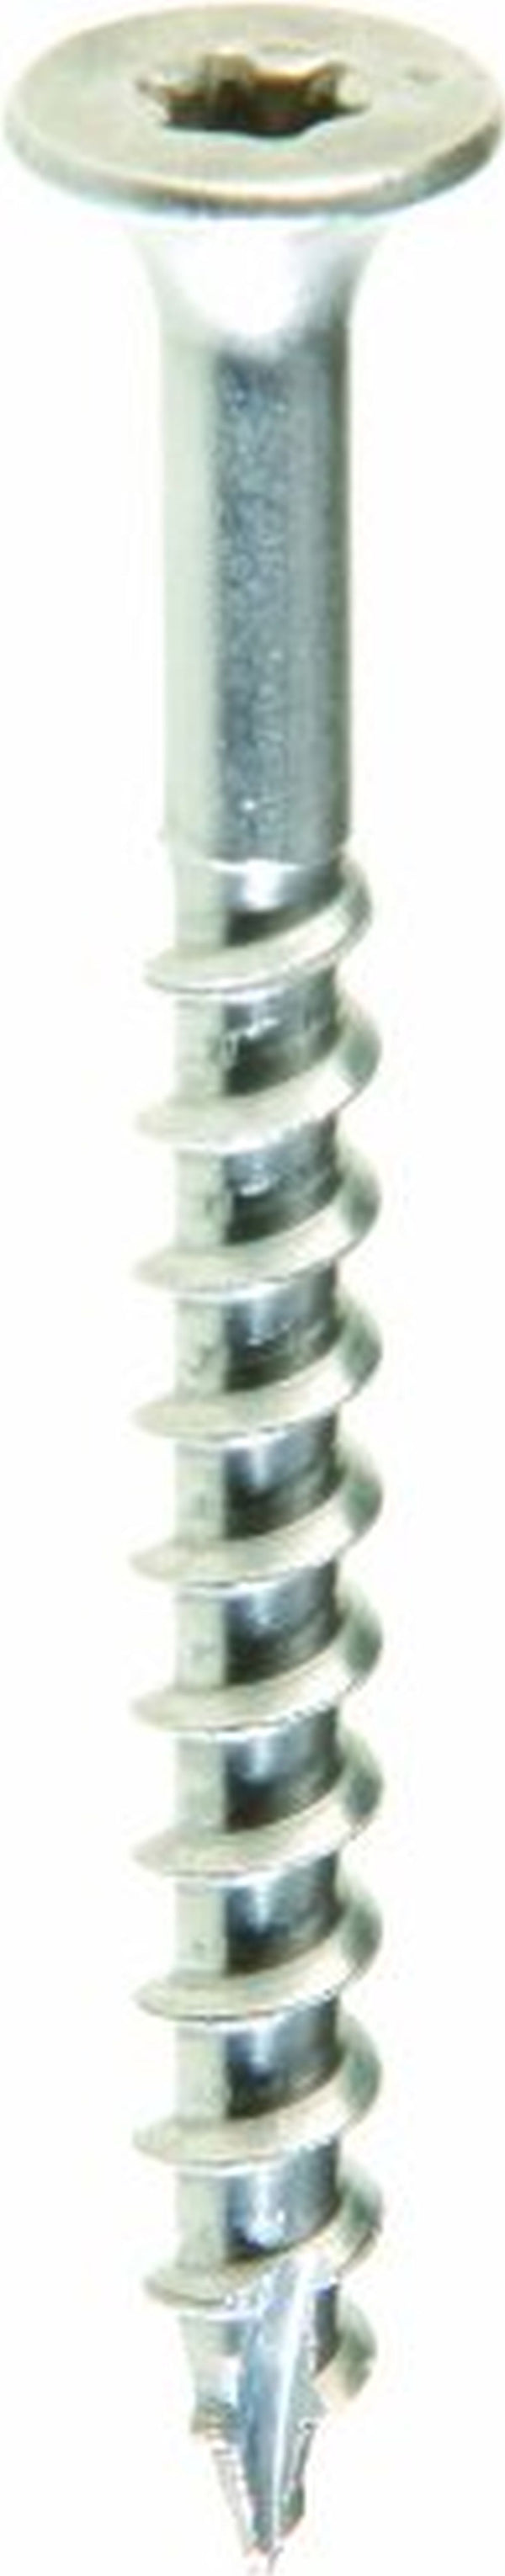 Grip Rite MAXS28DS3051 #8 x 2 in. 305 Stainless Steel Star Bugle Head Deck Screw (1 lb. Pack)